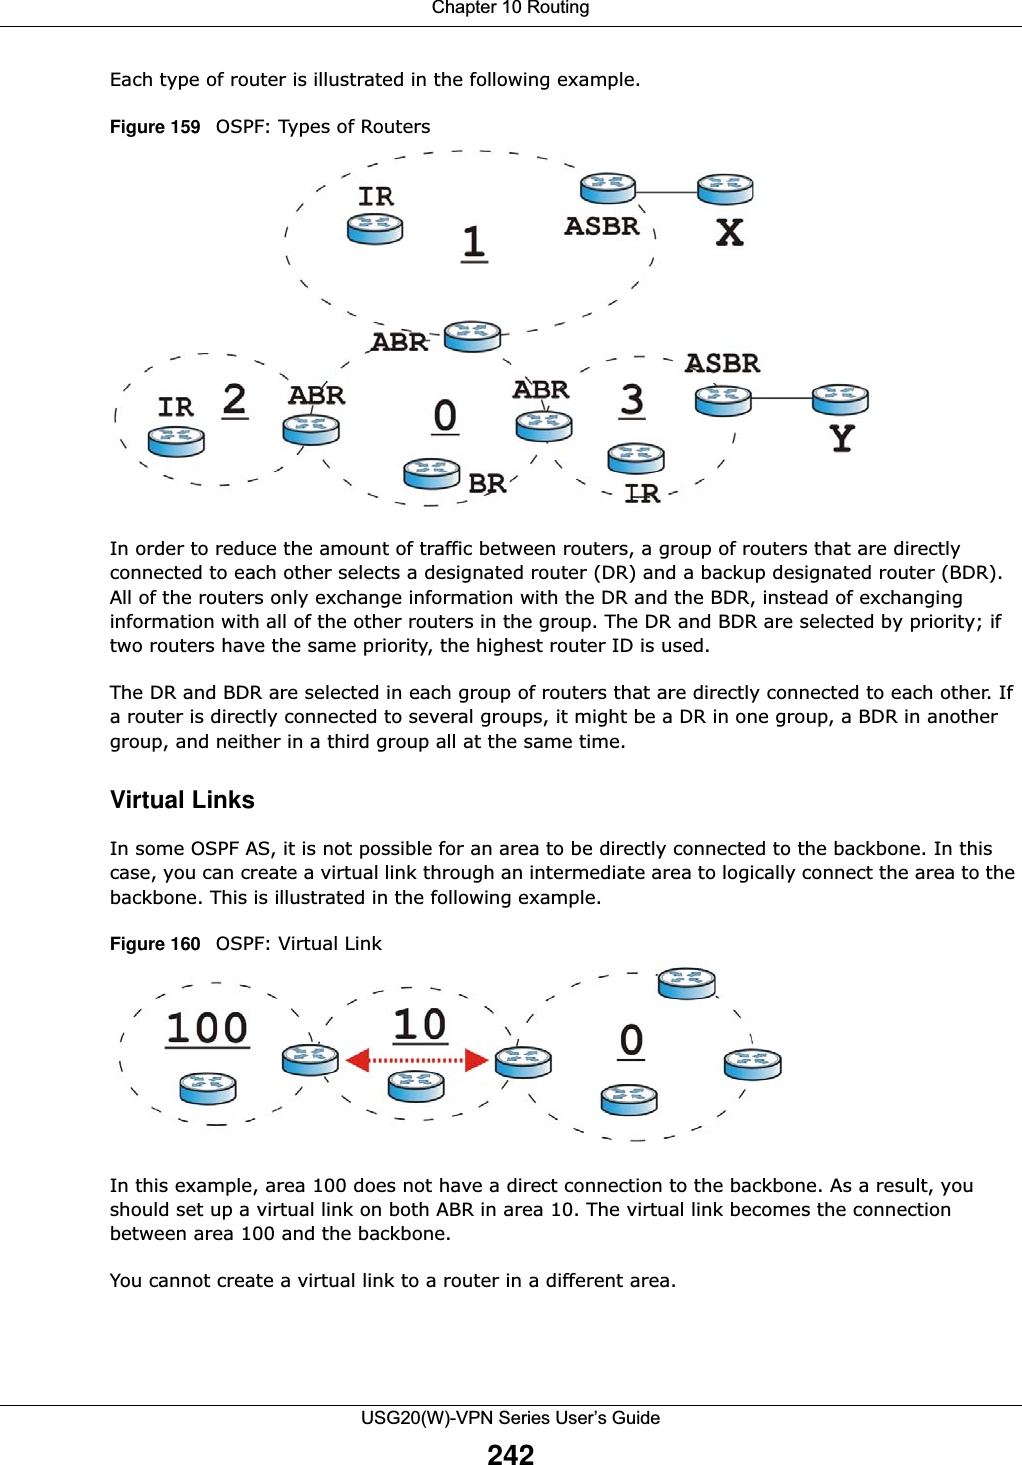 Chapter 10 RoutingUSG20(W)-VPN Series User’s Guide242Each type of router is illustrated in the following example.Figure 159   OSPF: Types of RoutersIn order to reduce the amount of traffic between routers, a group of routers that are directly connected to each other selects a designated router (DR) and a backup designated router (BDR). All of the routers only exchange information with the DR and the BDR, instead of exchanging information with all of the other routers in the group. The DR and BDR are selected by priority; if two routers have the same priority, the highest router ID is used.The DR and BDR are selected in each group of routers that are directly connected to each other. If a router is directly connected to several groups, it might be a DR in one group, a BDR in another group, and neither in a third group all at the same time.Virtual LinksIn some OSPF AS, it is not possible for an area to be directly connected to the backbone. In this case, you can create a virtual link through an intermediate area to logically connect the area to the backbone. This is illustrated in the following example.Figure 160   OSPF: Virtual LinkIn this example, area 100 does not have a direct connection to the backbone. As a result, you should set up a virtual link on both ABR in area 10. The virtual link becomes the connection between area 100 and the backbone.You cannot create a virtual link to a router in a different area.